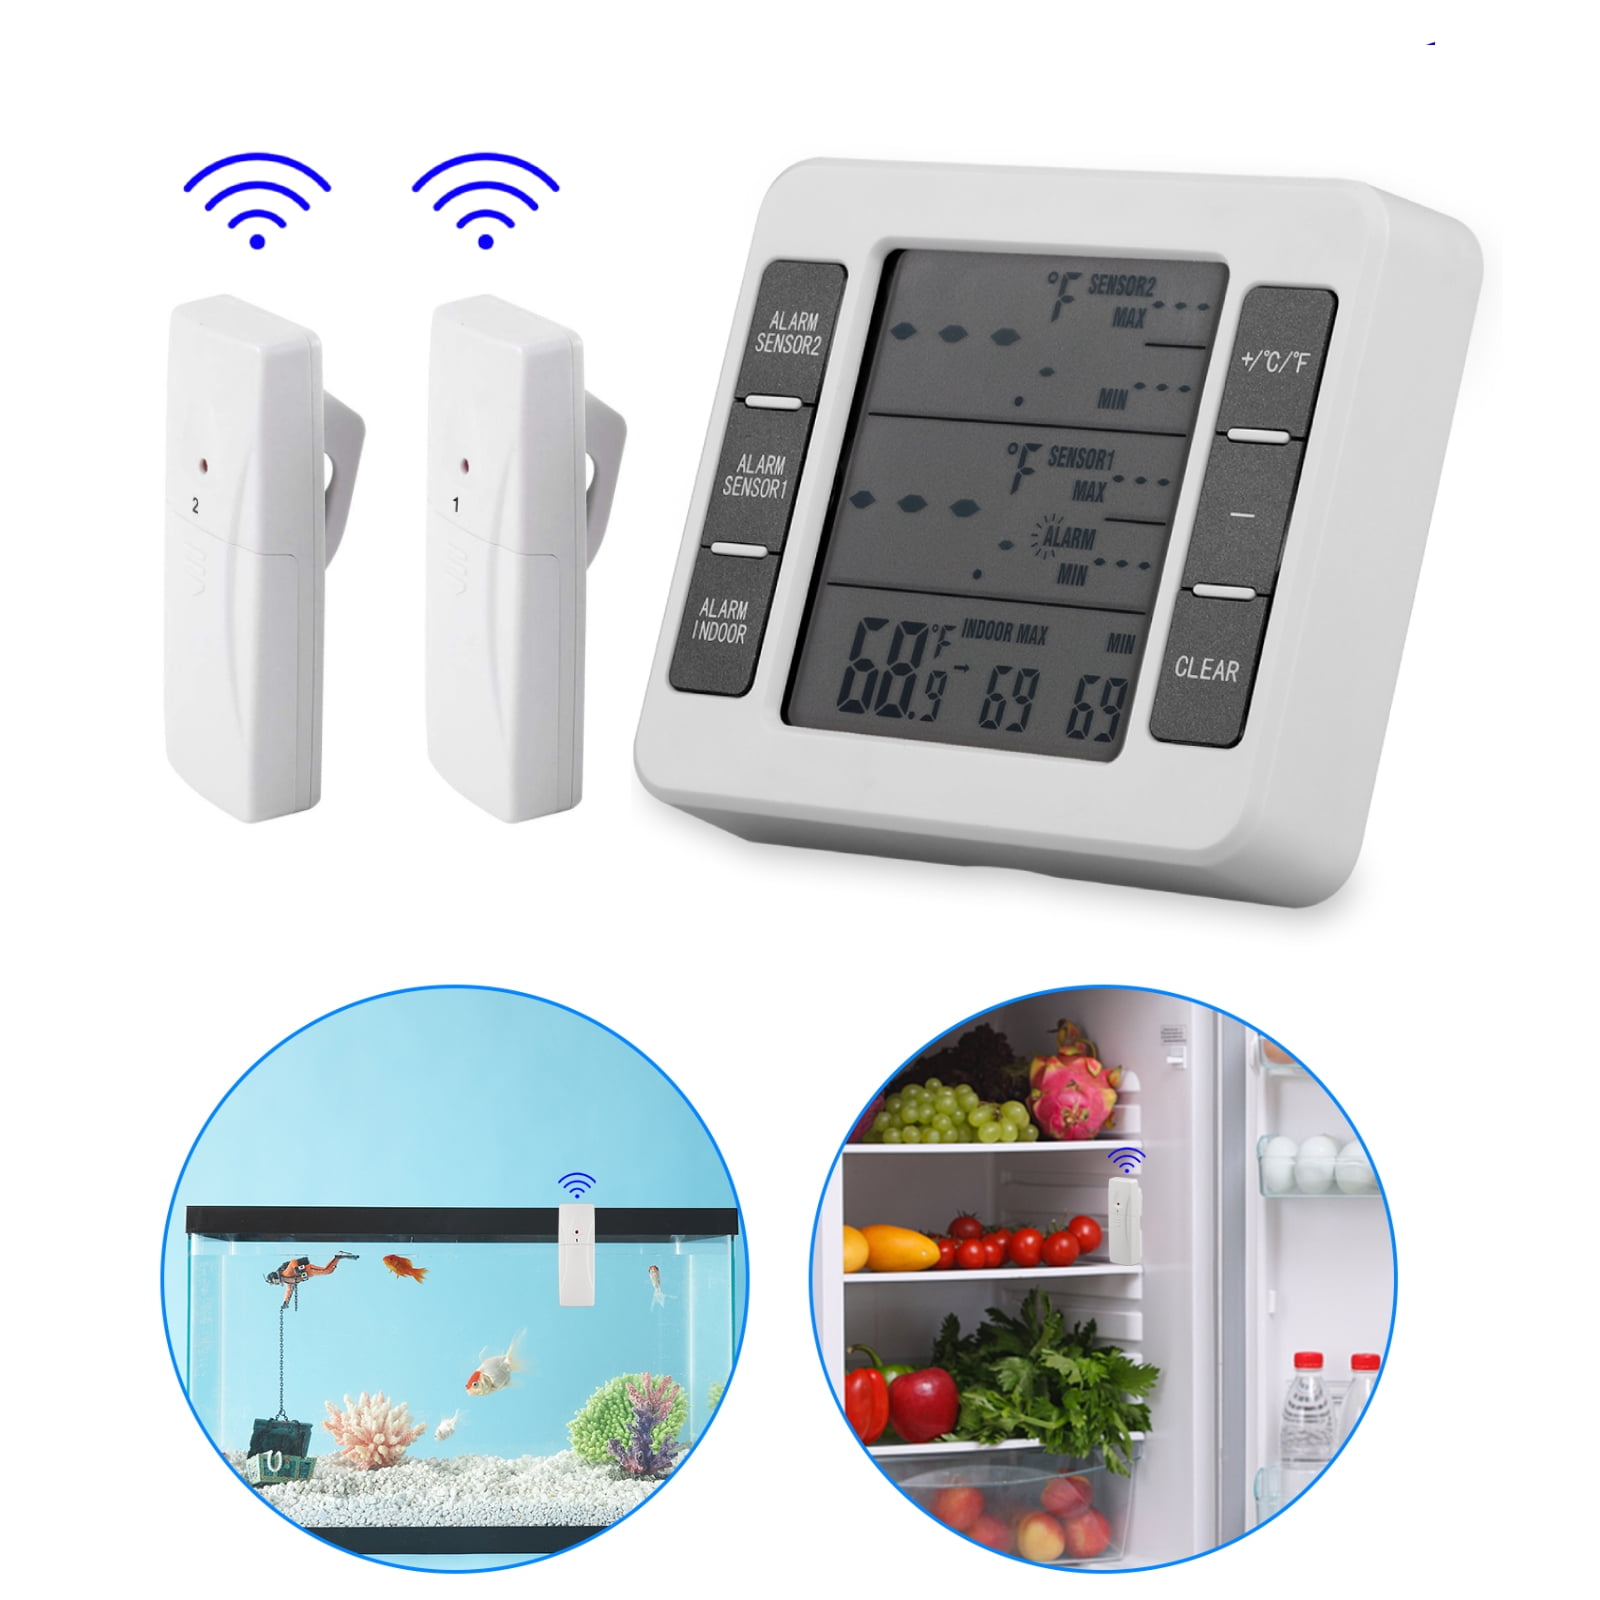 Oyria Waterproof Refrigerator Thermometer Freezer Indoor Wireless Thermometer Digital Audible Alarm with 2 Sensor Min/Max Display 